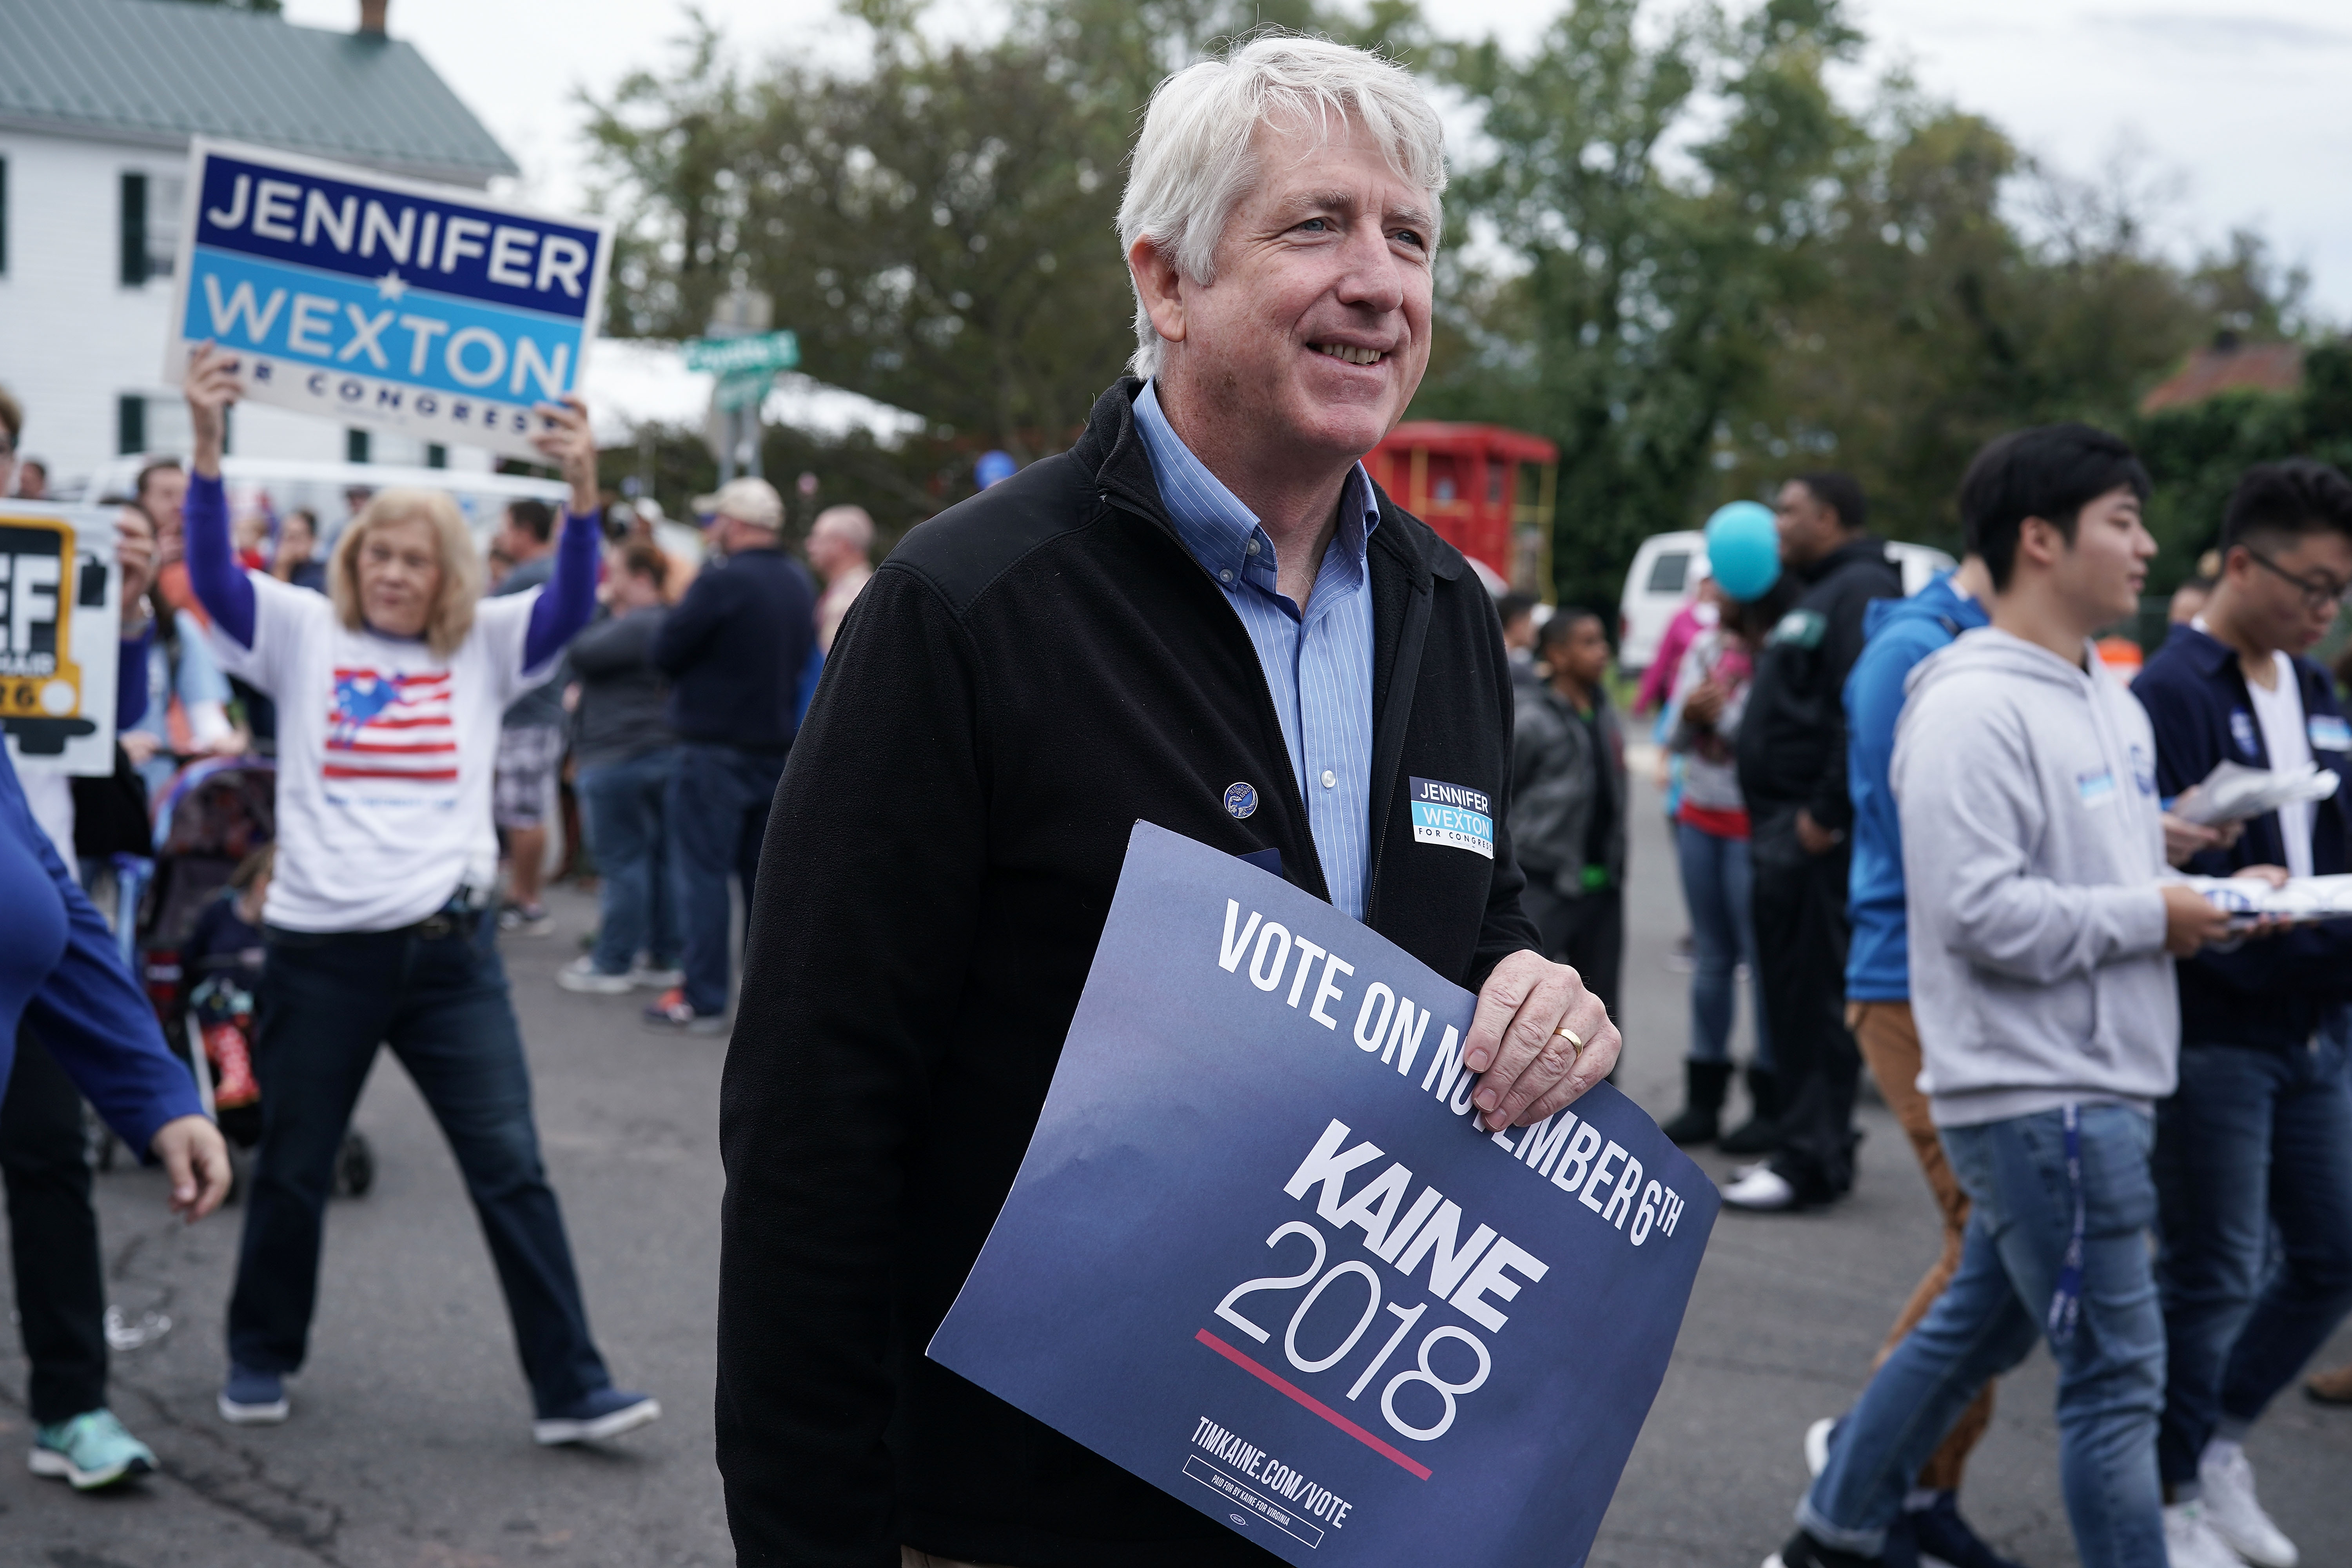 Virginia State Attorney General Mark Herring (C) participates in the annual Haymarket Day parade October 20, 2018 in Haymarket, Virginia. (Photo by Alex Wong/Getty Images)